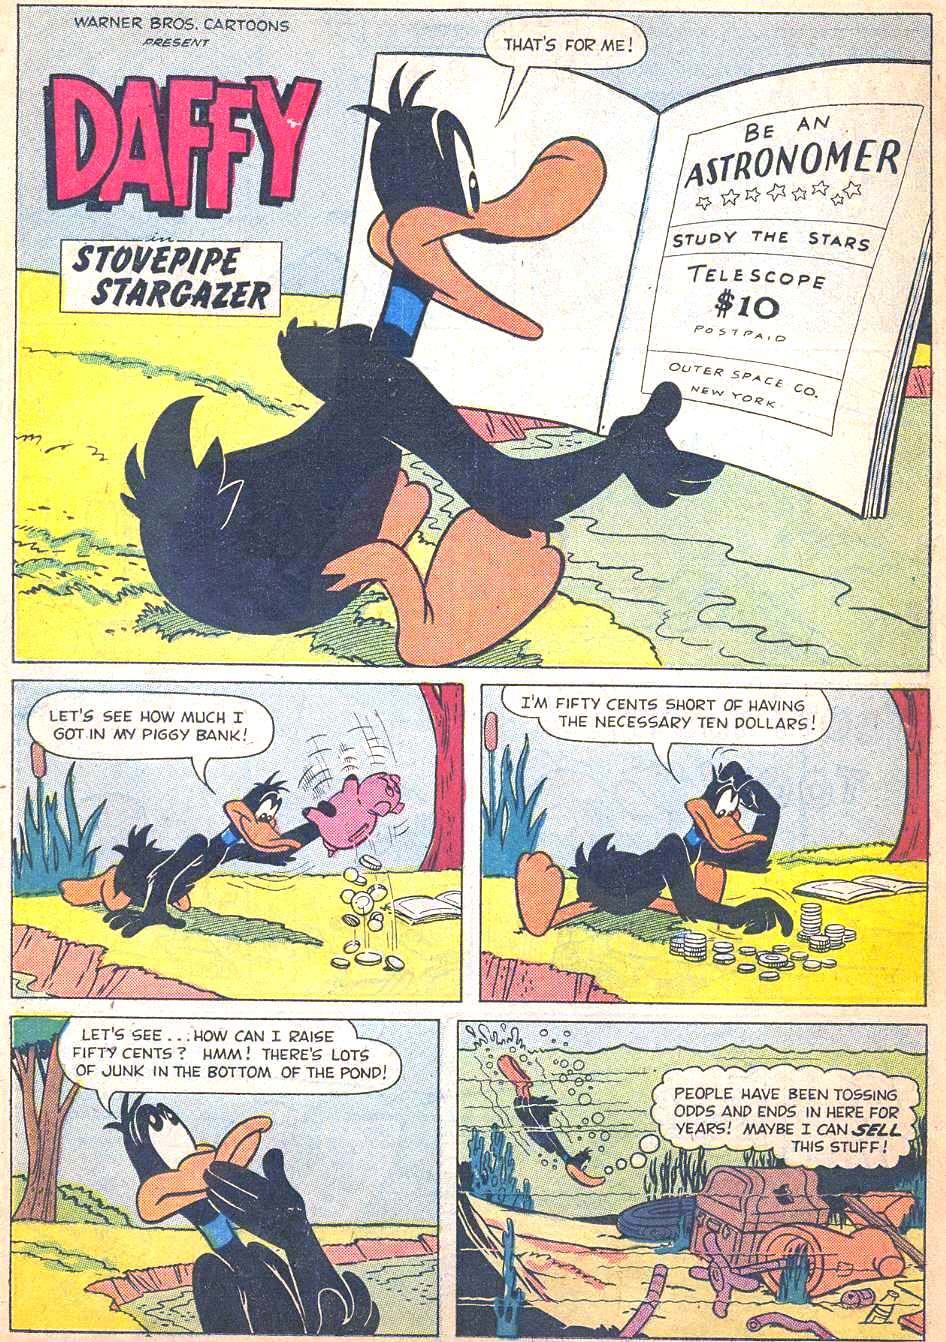 Read online Daffy comic -  Issue #10 - 22